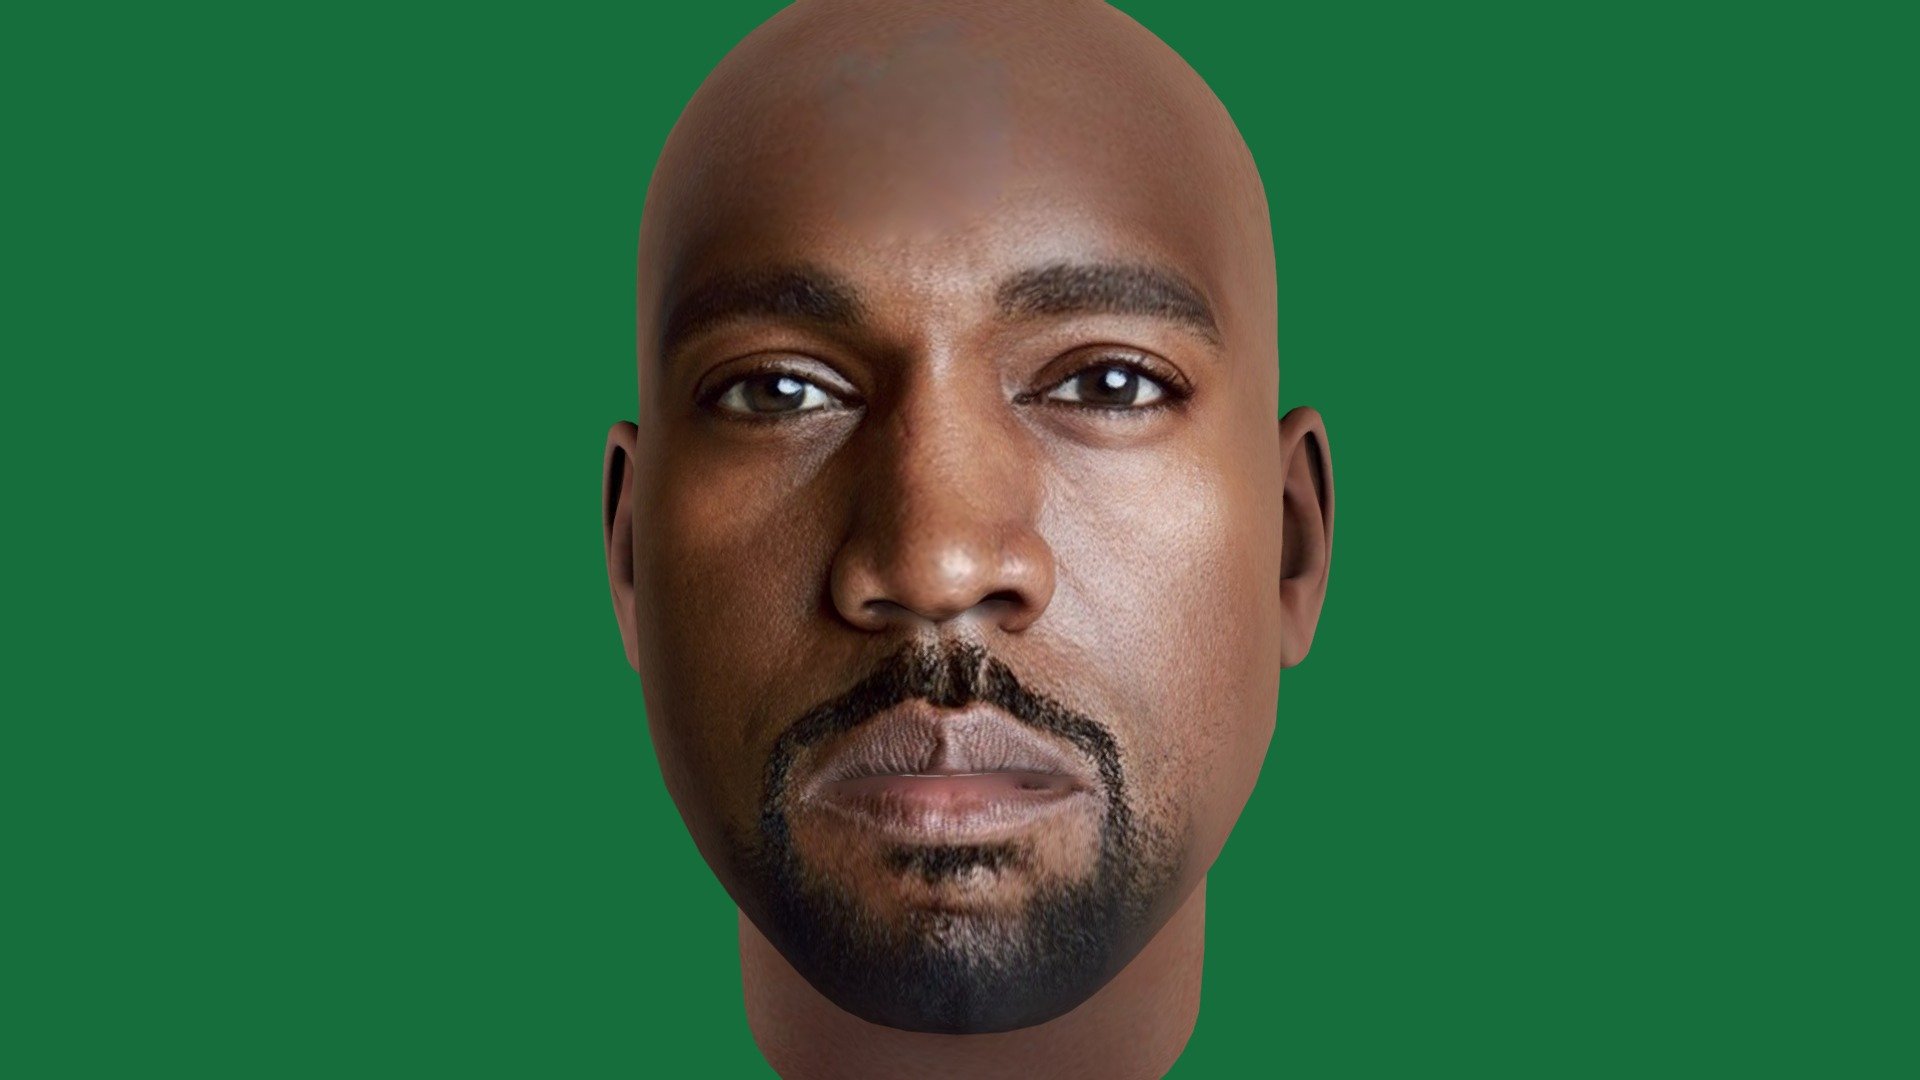 Kanye West face mesh .Demo  - Kanye West - 3D model by Nyilonelycompany 3d model